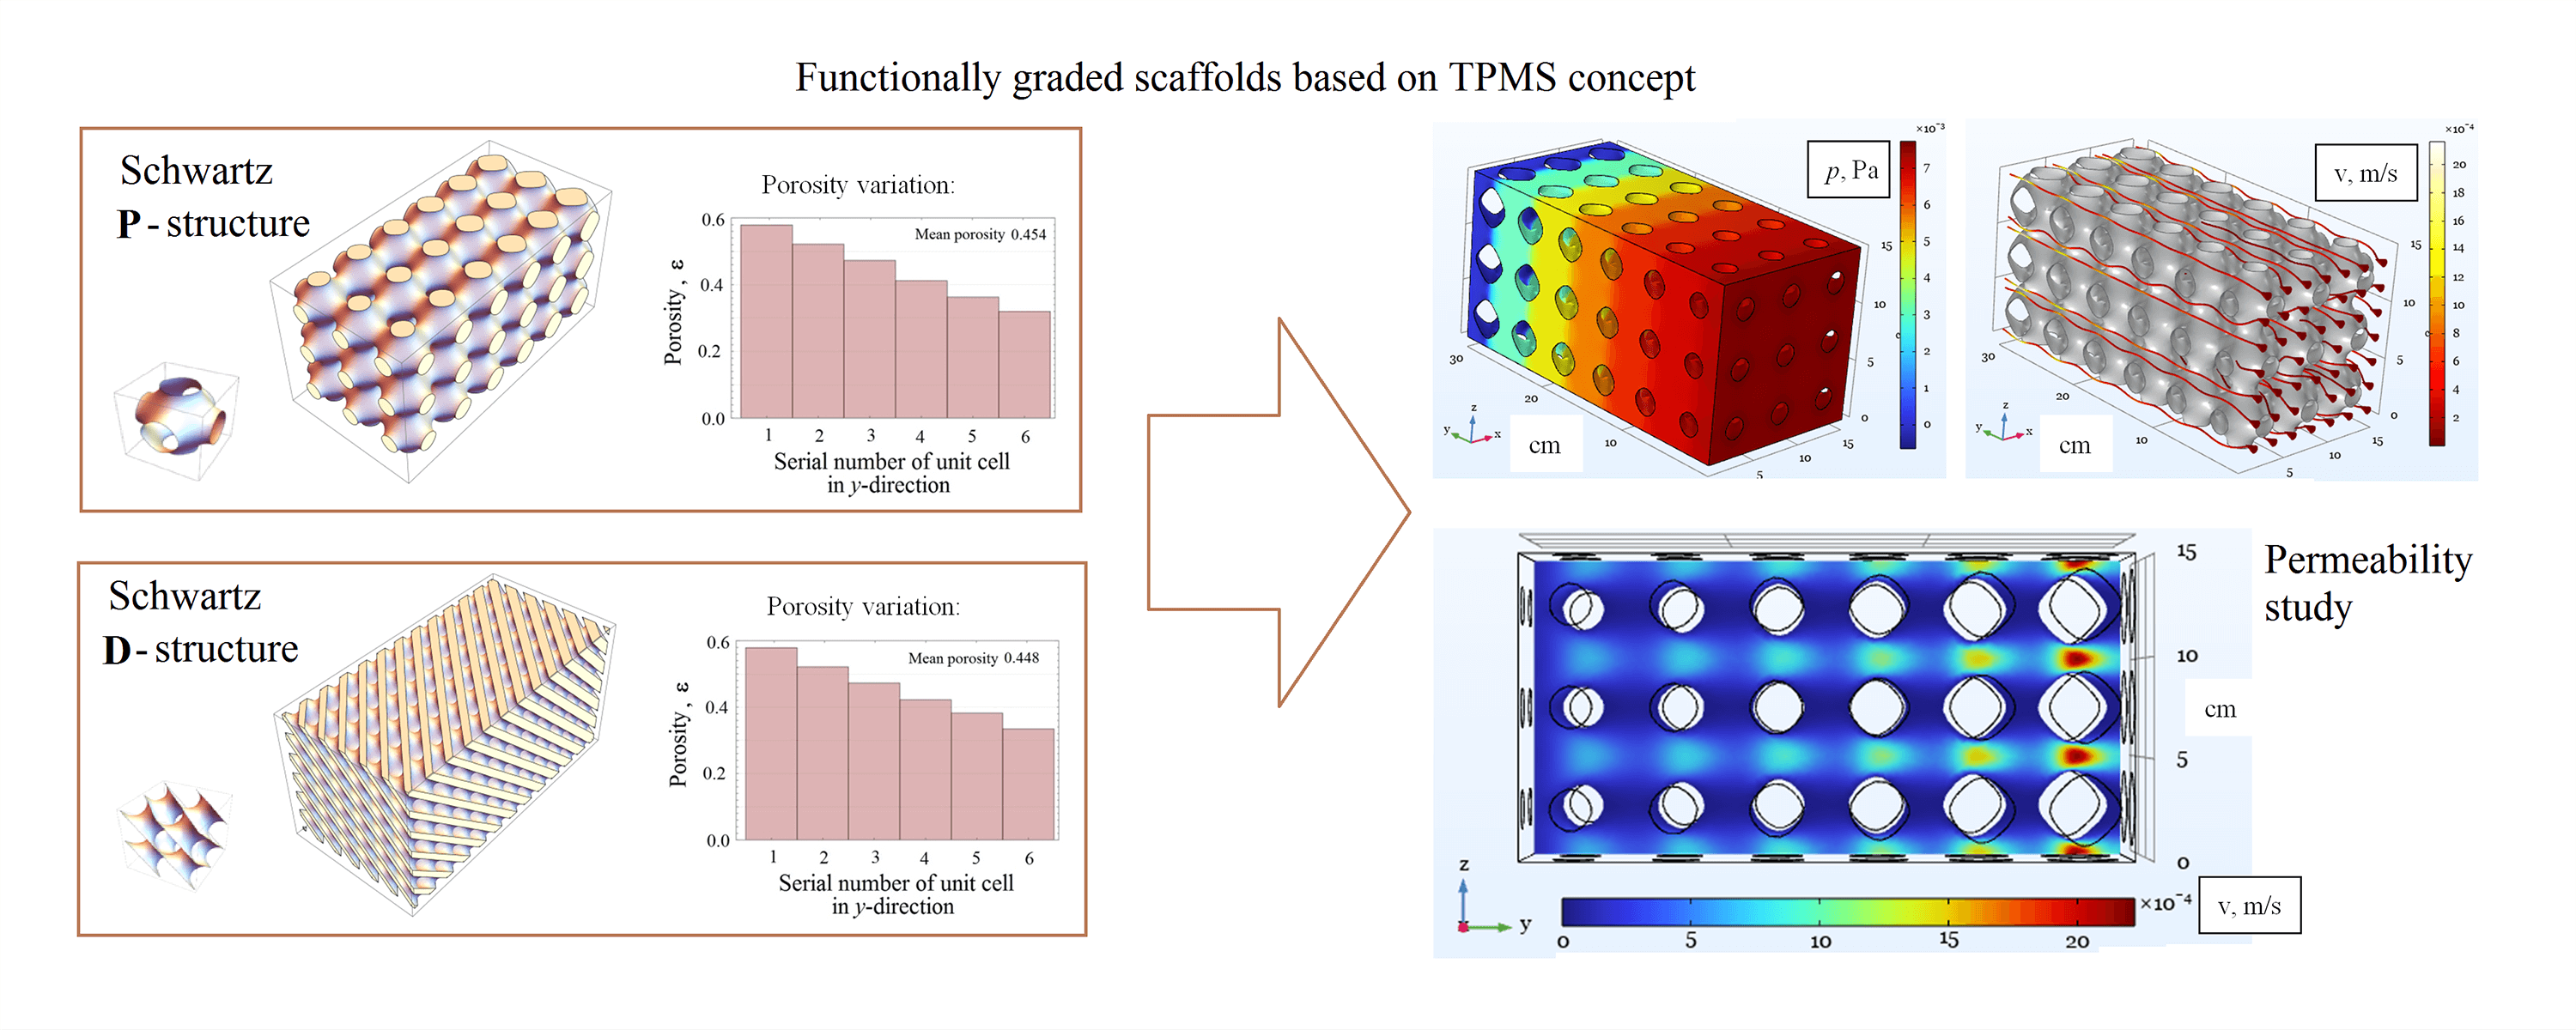 Numerical Analysis of Permeability of Functionally Graded Scaffolds